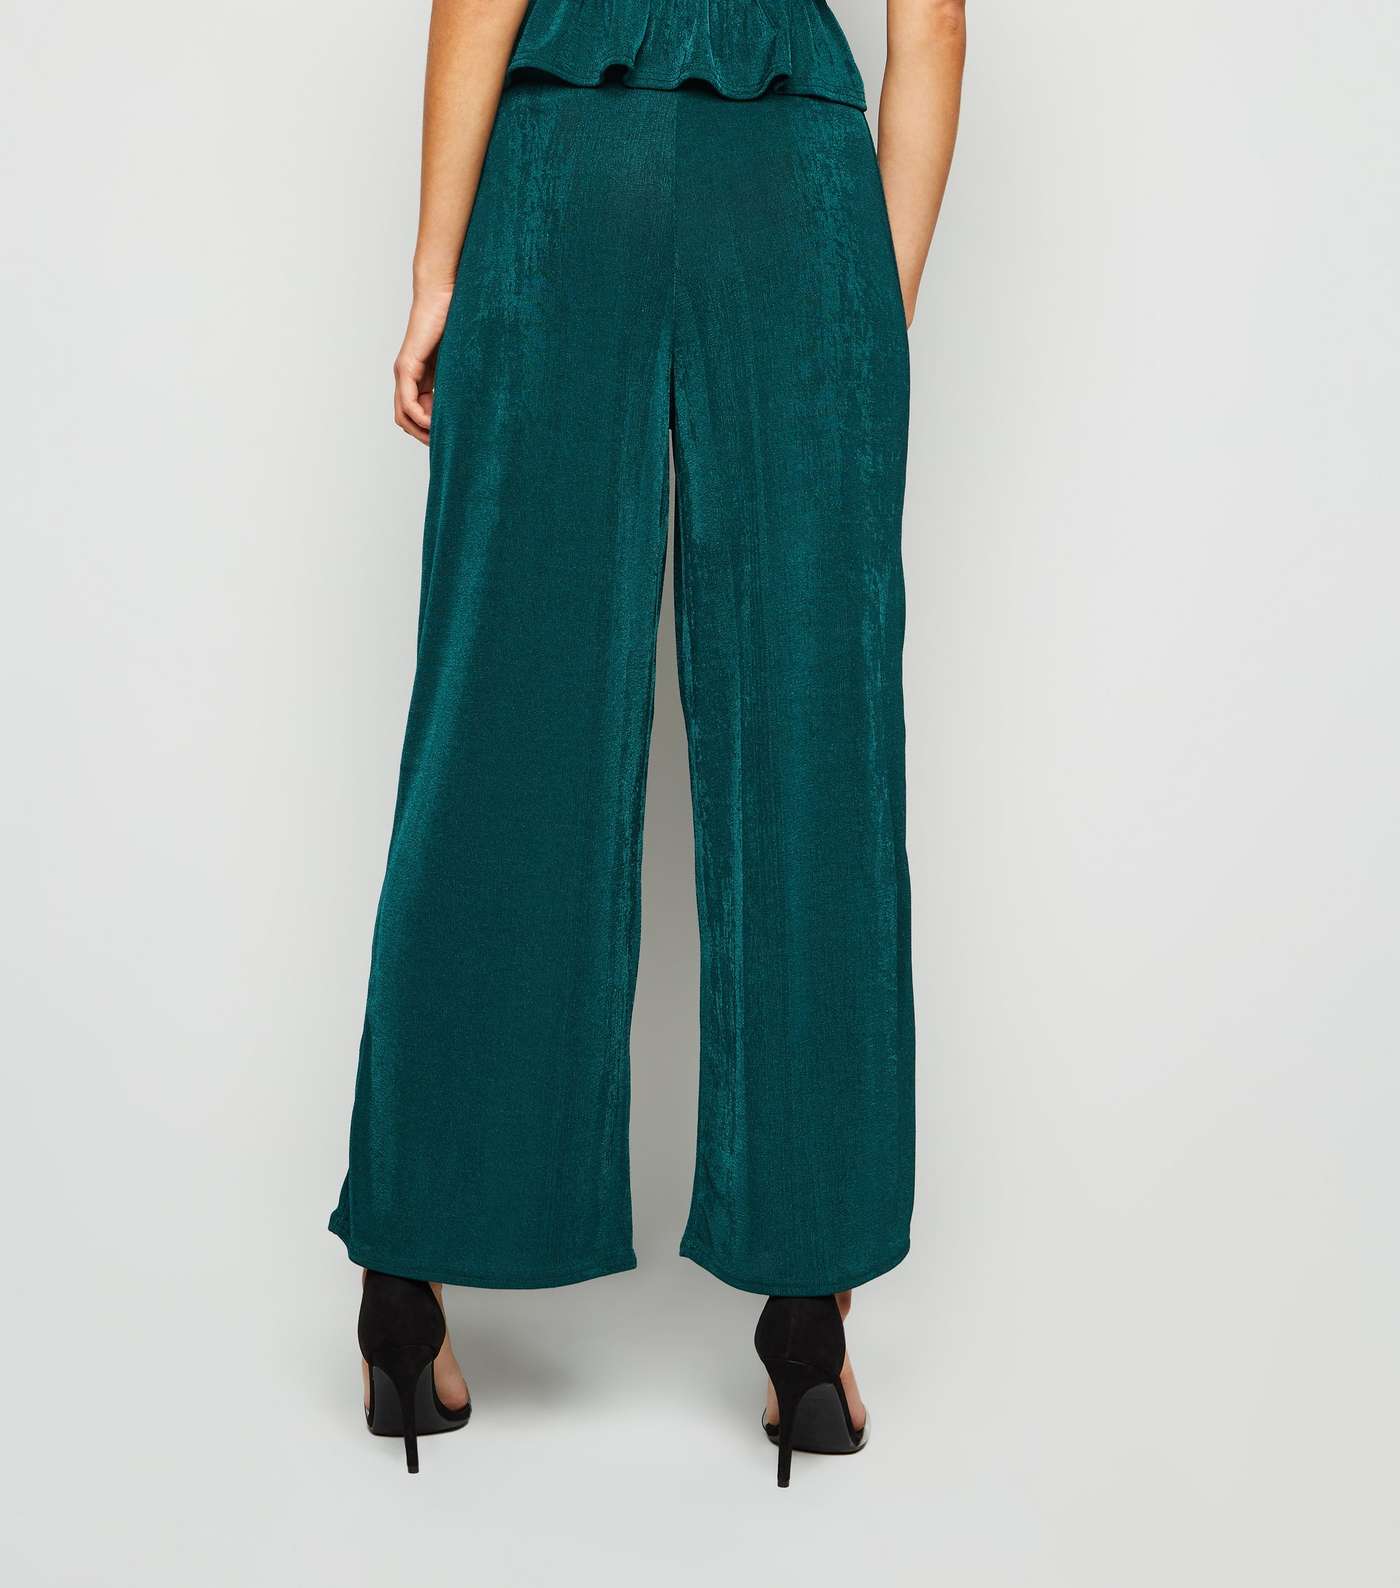 Urban Bliss Teal High Shine Trousers Image 3